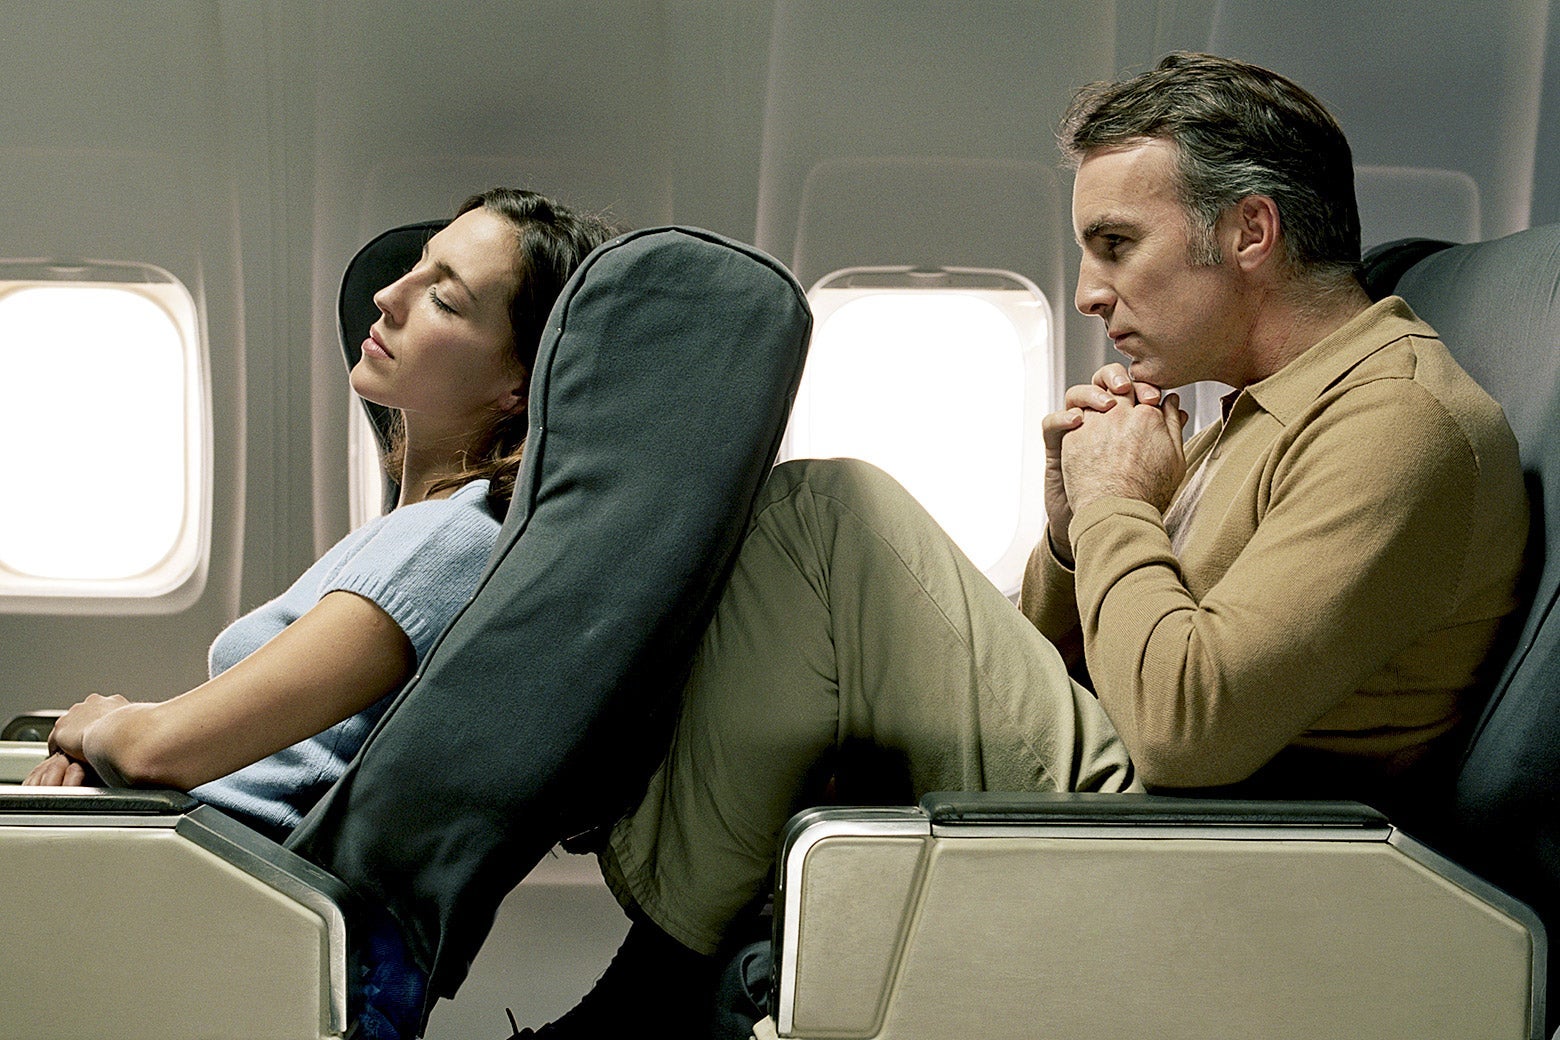 A woman reclining an airplane seat and a man uncomfortable behind her.